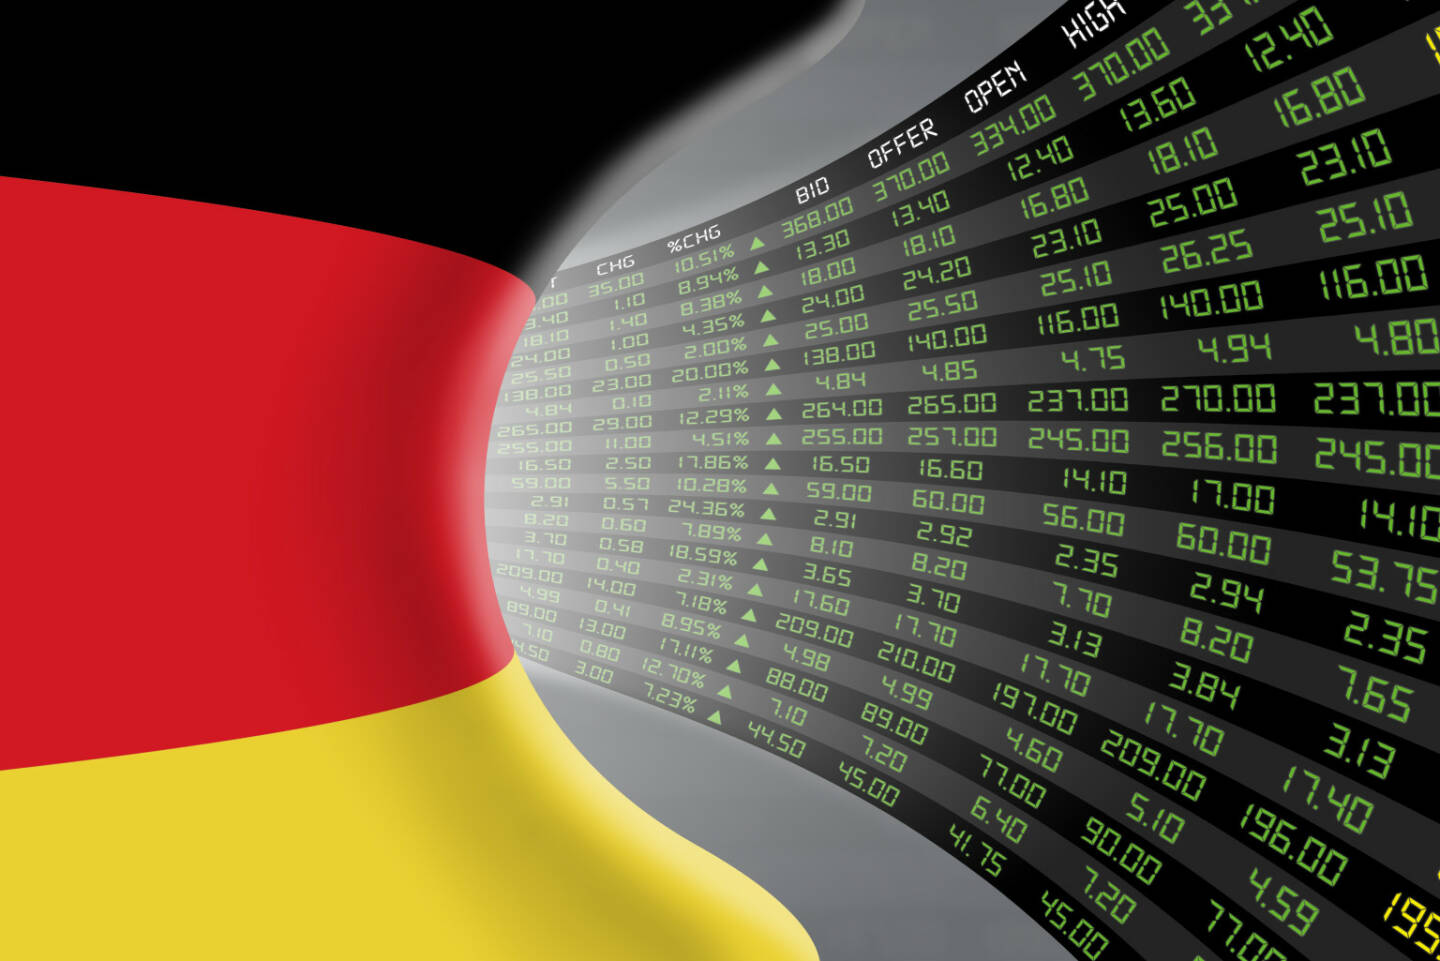 DAX, Kurszettel, grün http://www.shutterstock.com/de/pic-361977830/stock-photo-national-flag-of-germany-with-a-large-display-of-daily-stock-market-price-and-quotations-during.html